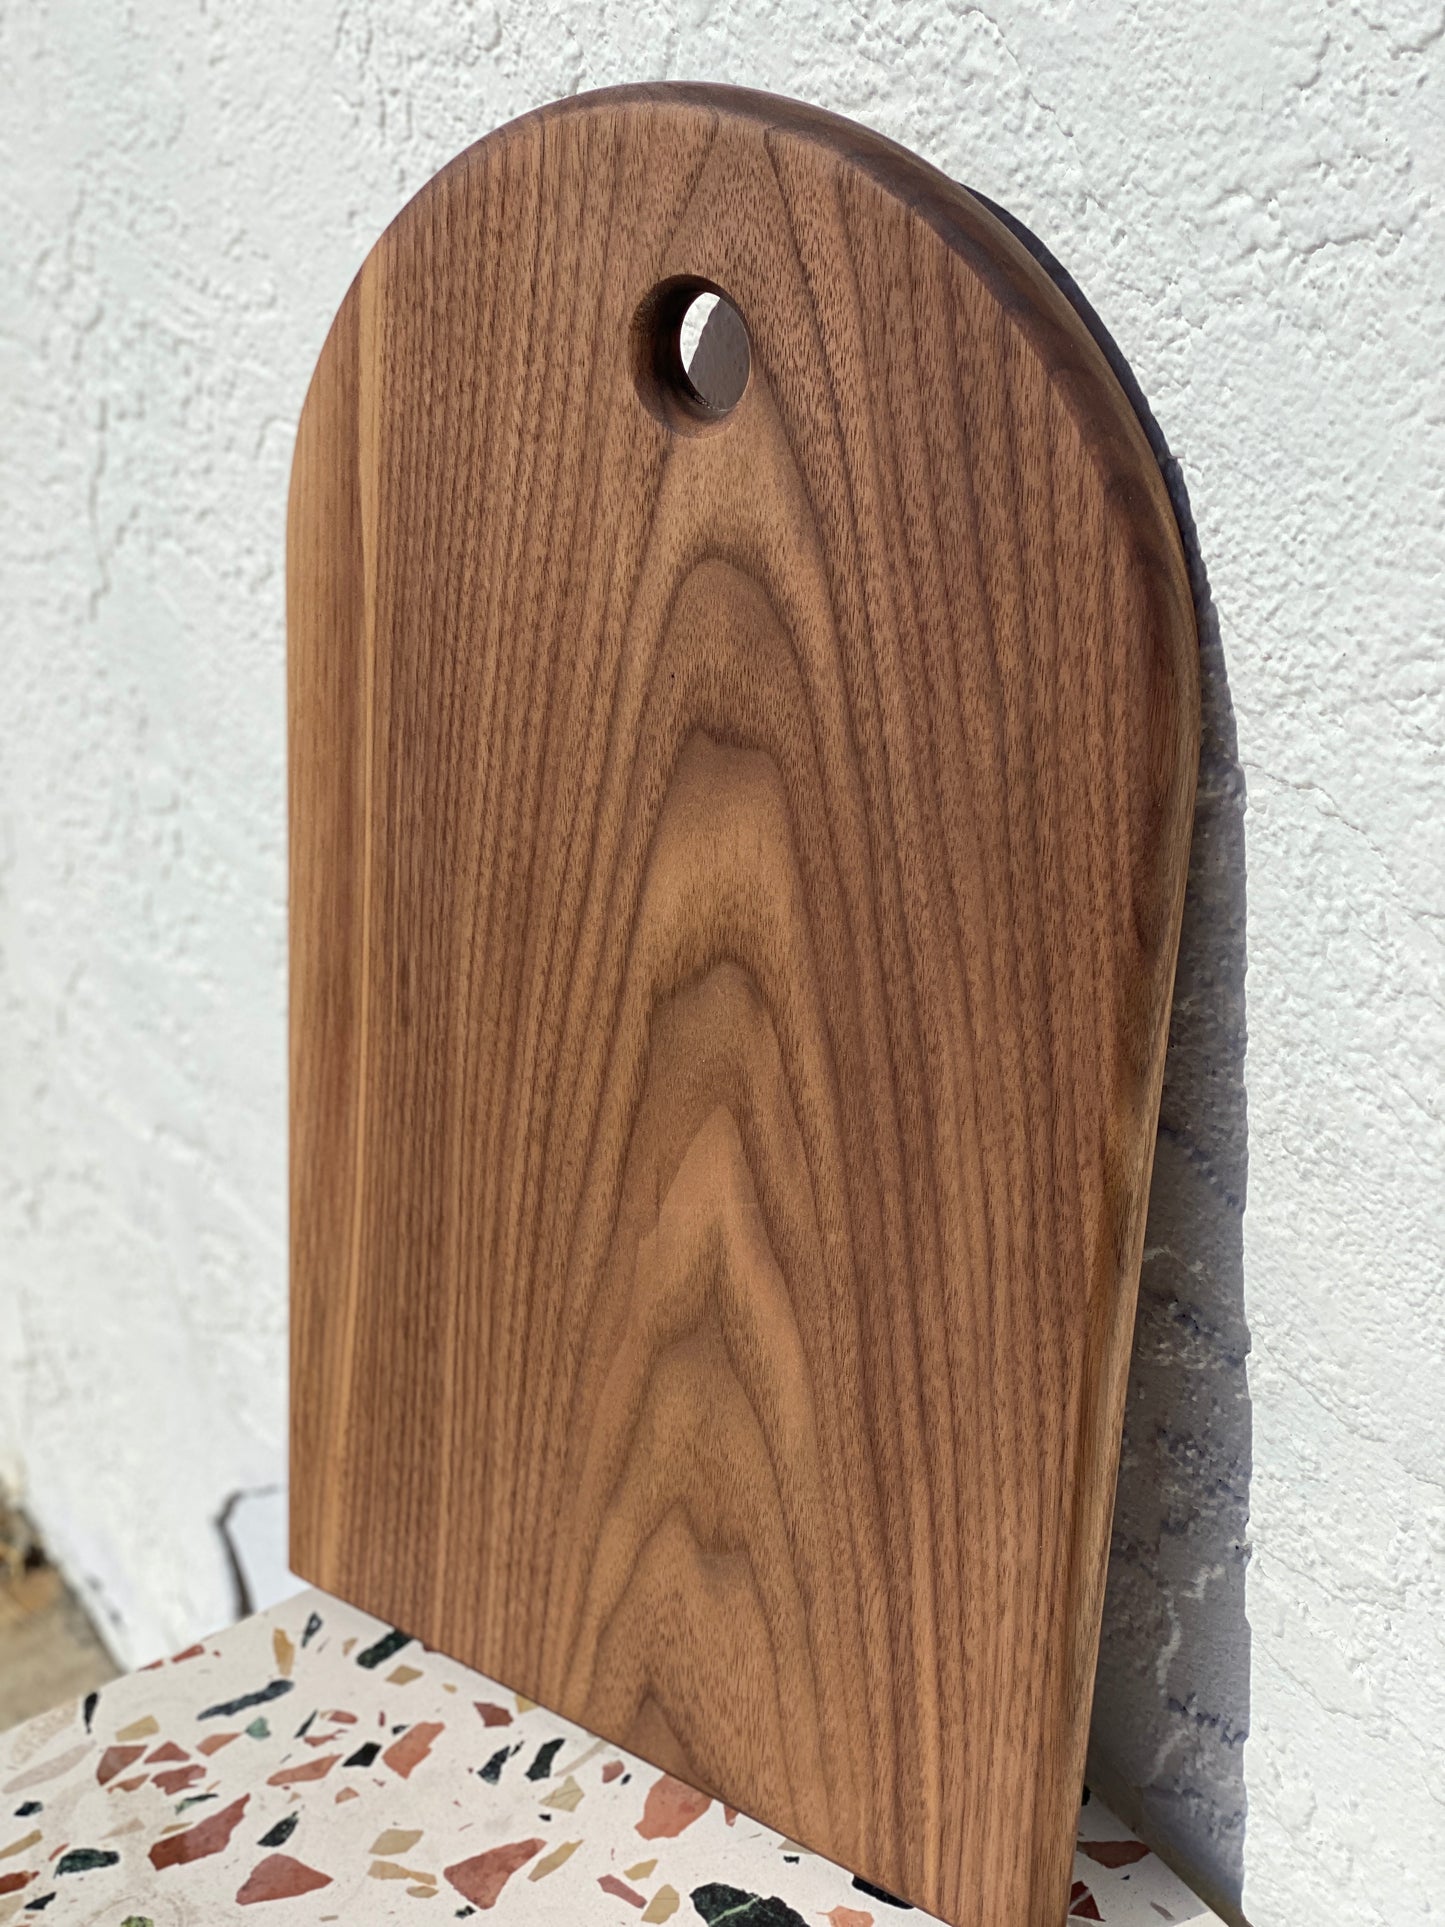 The Pathway Cutting Board